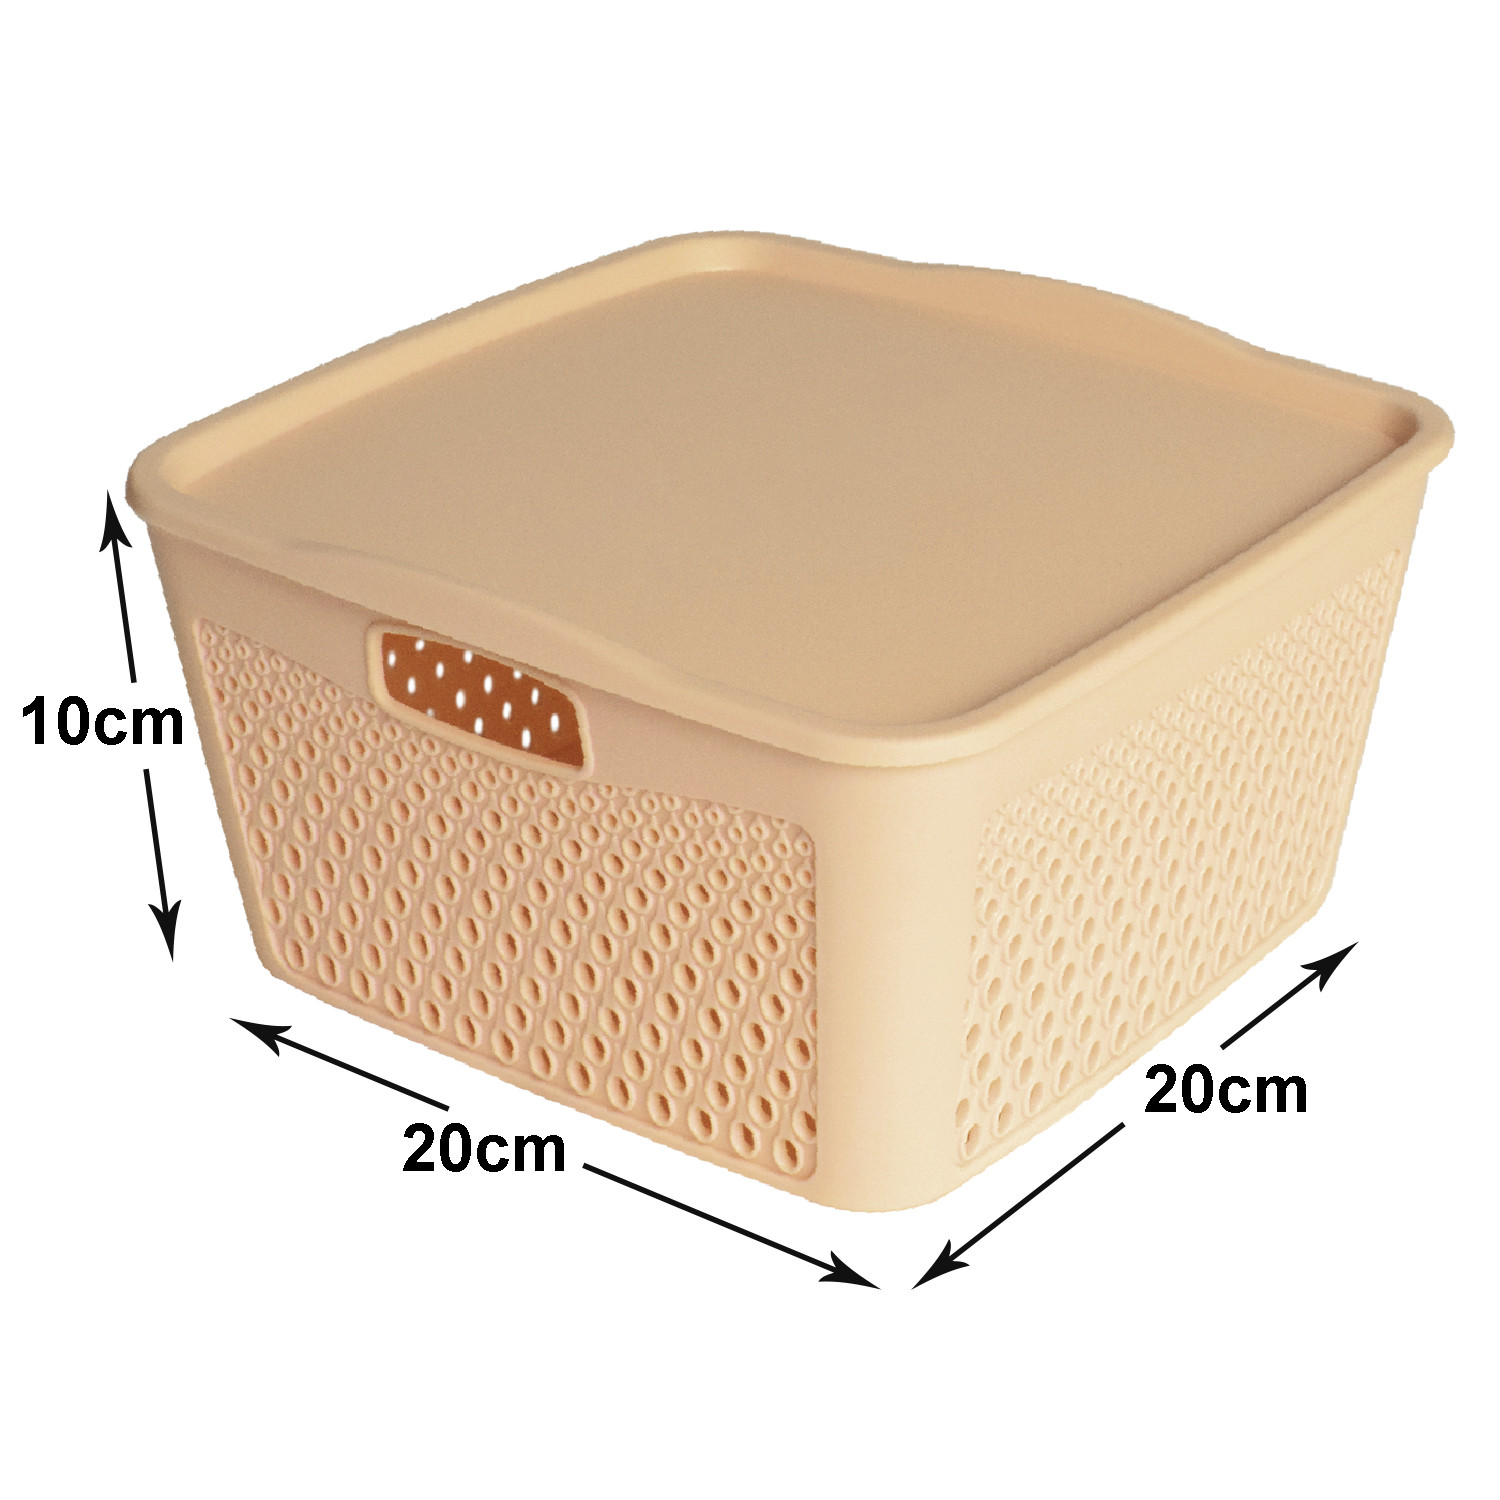 Kuber Industries Netted Design Unbreakable Multipurpose Square Shape Plastic Storage Baskets with lid Small (Beige)